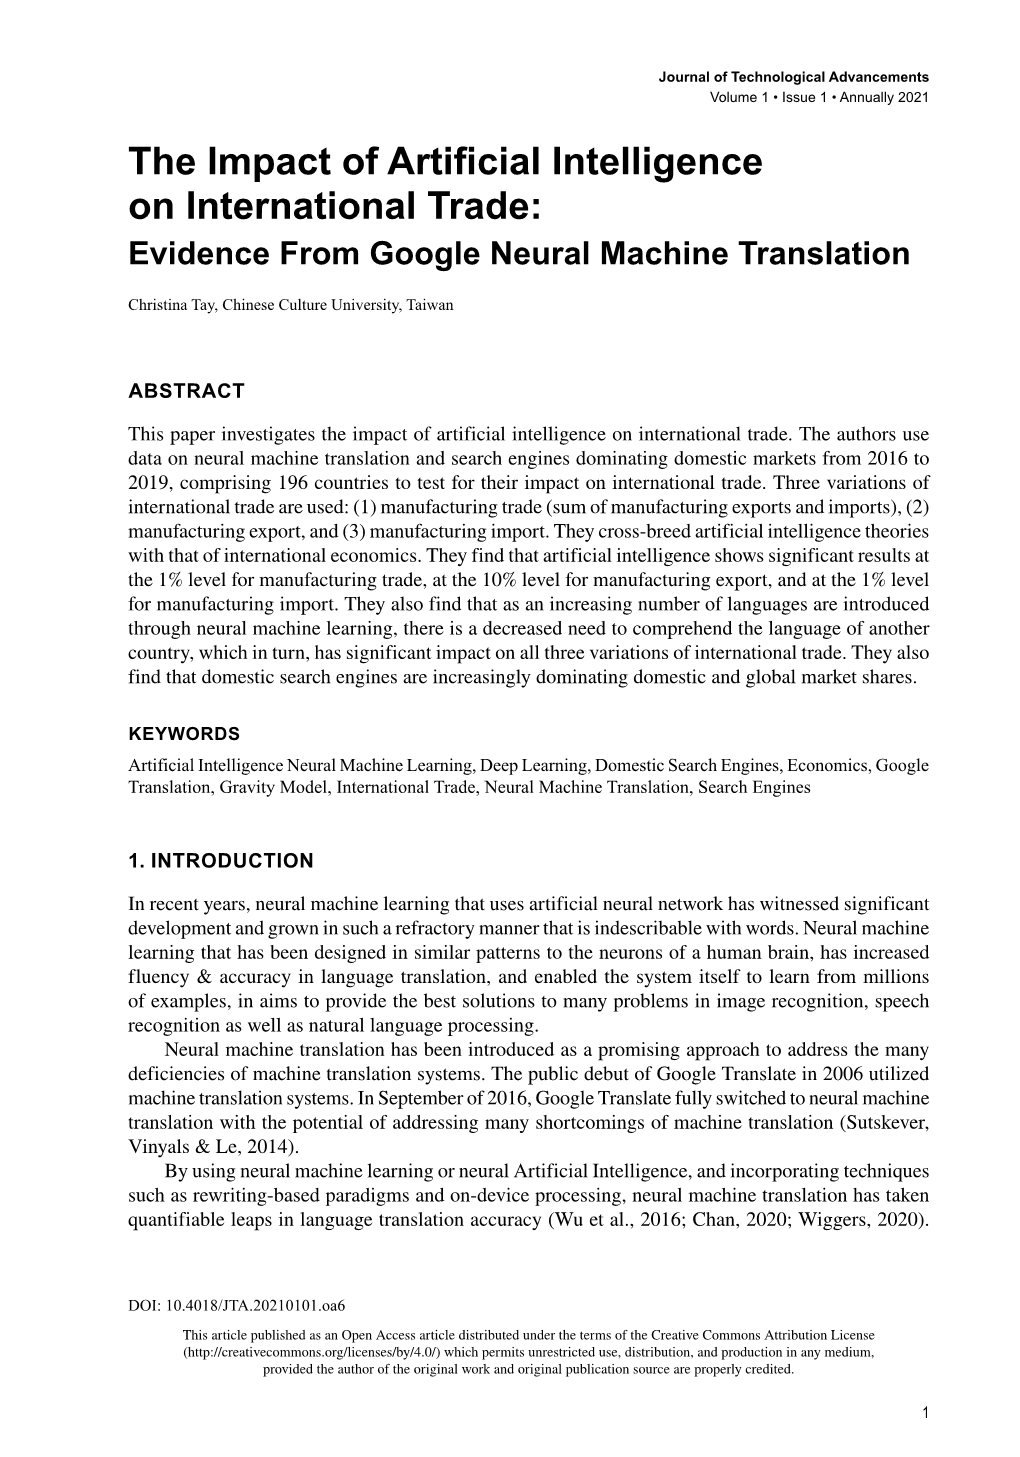 The Impact of Artificial Intelligence on International Trade: Evidence from Google Neural Machine Translation